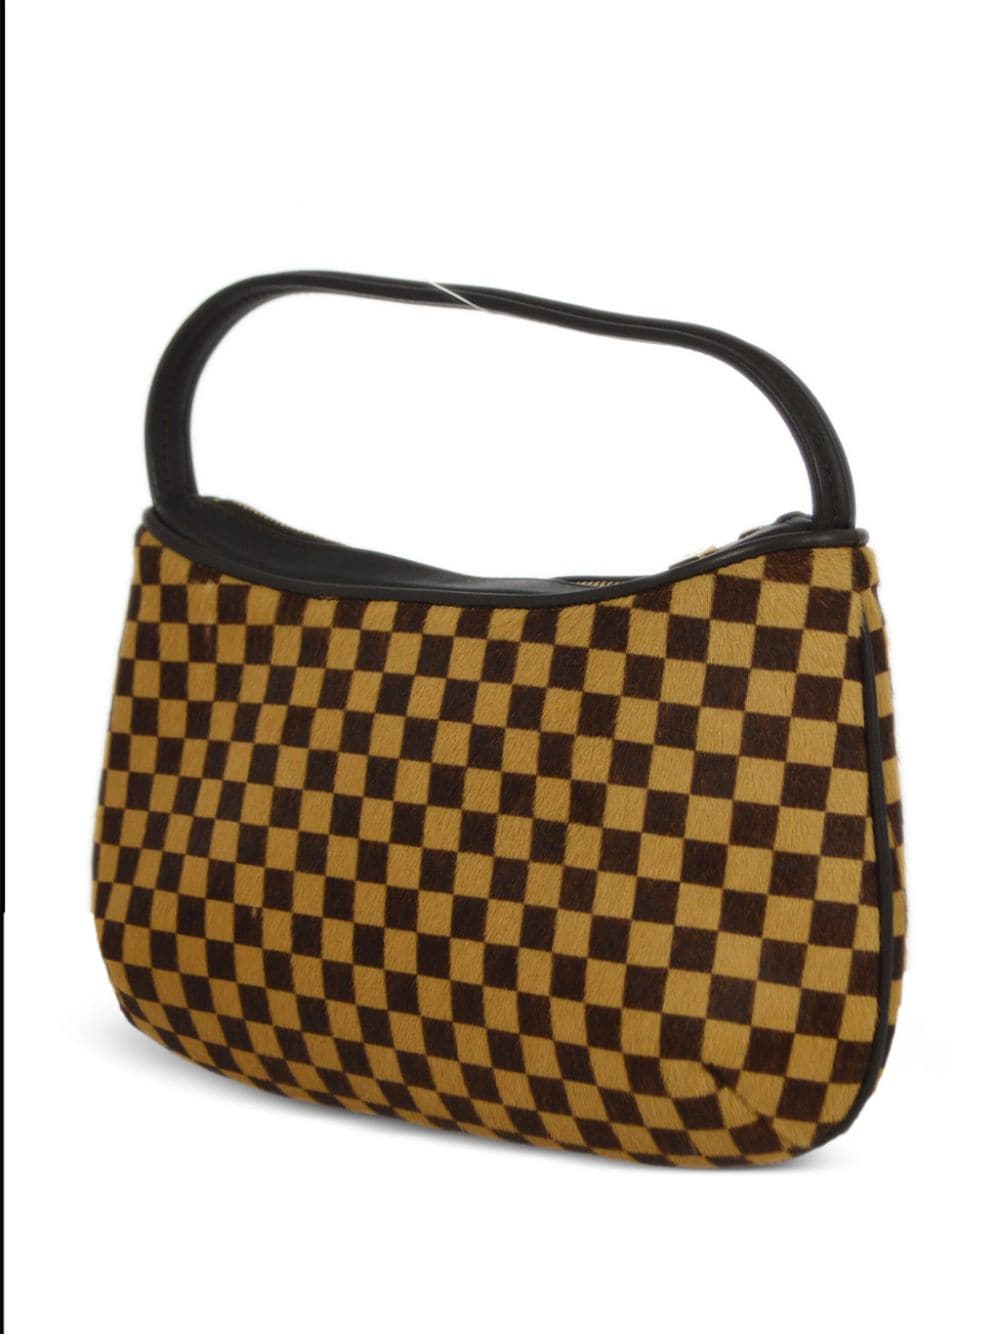 Louis Vuitton Pre-Owned 2001 pre-owned Damier Sauvage Tigar handtas - Bruin